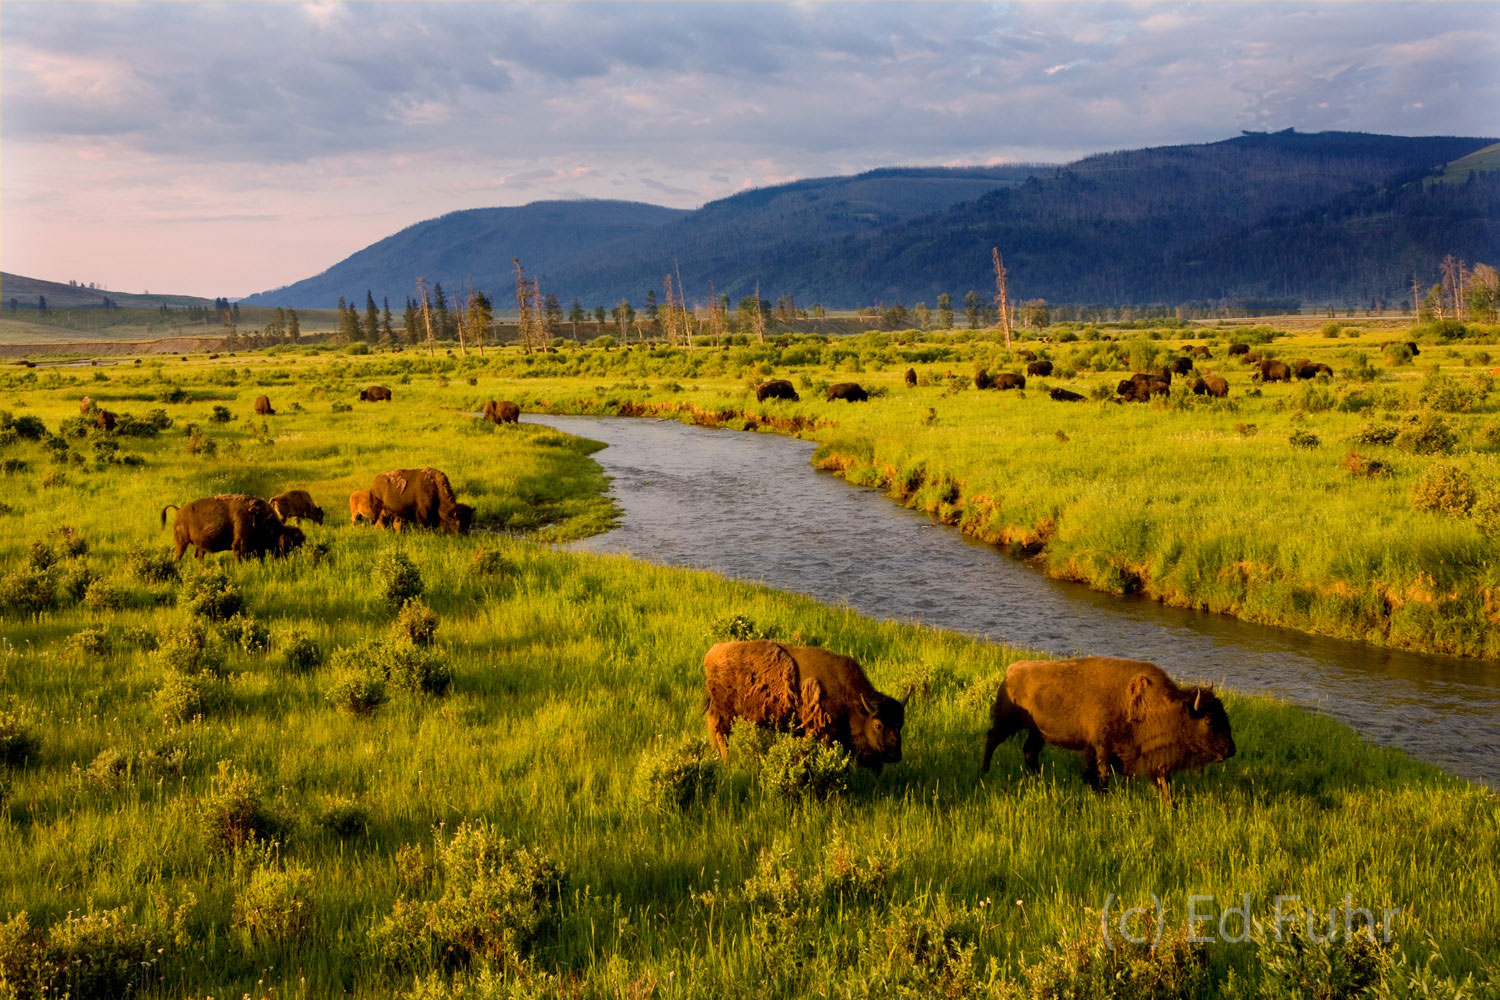 A herd of bison are on the move in early summer.  Before long, they will have relocated to cooler higher country.